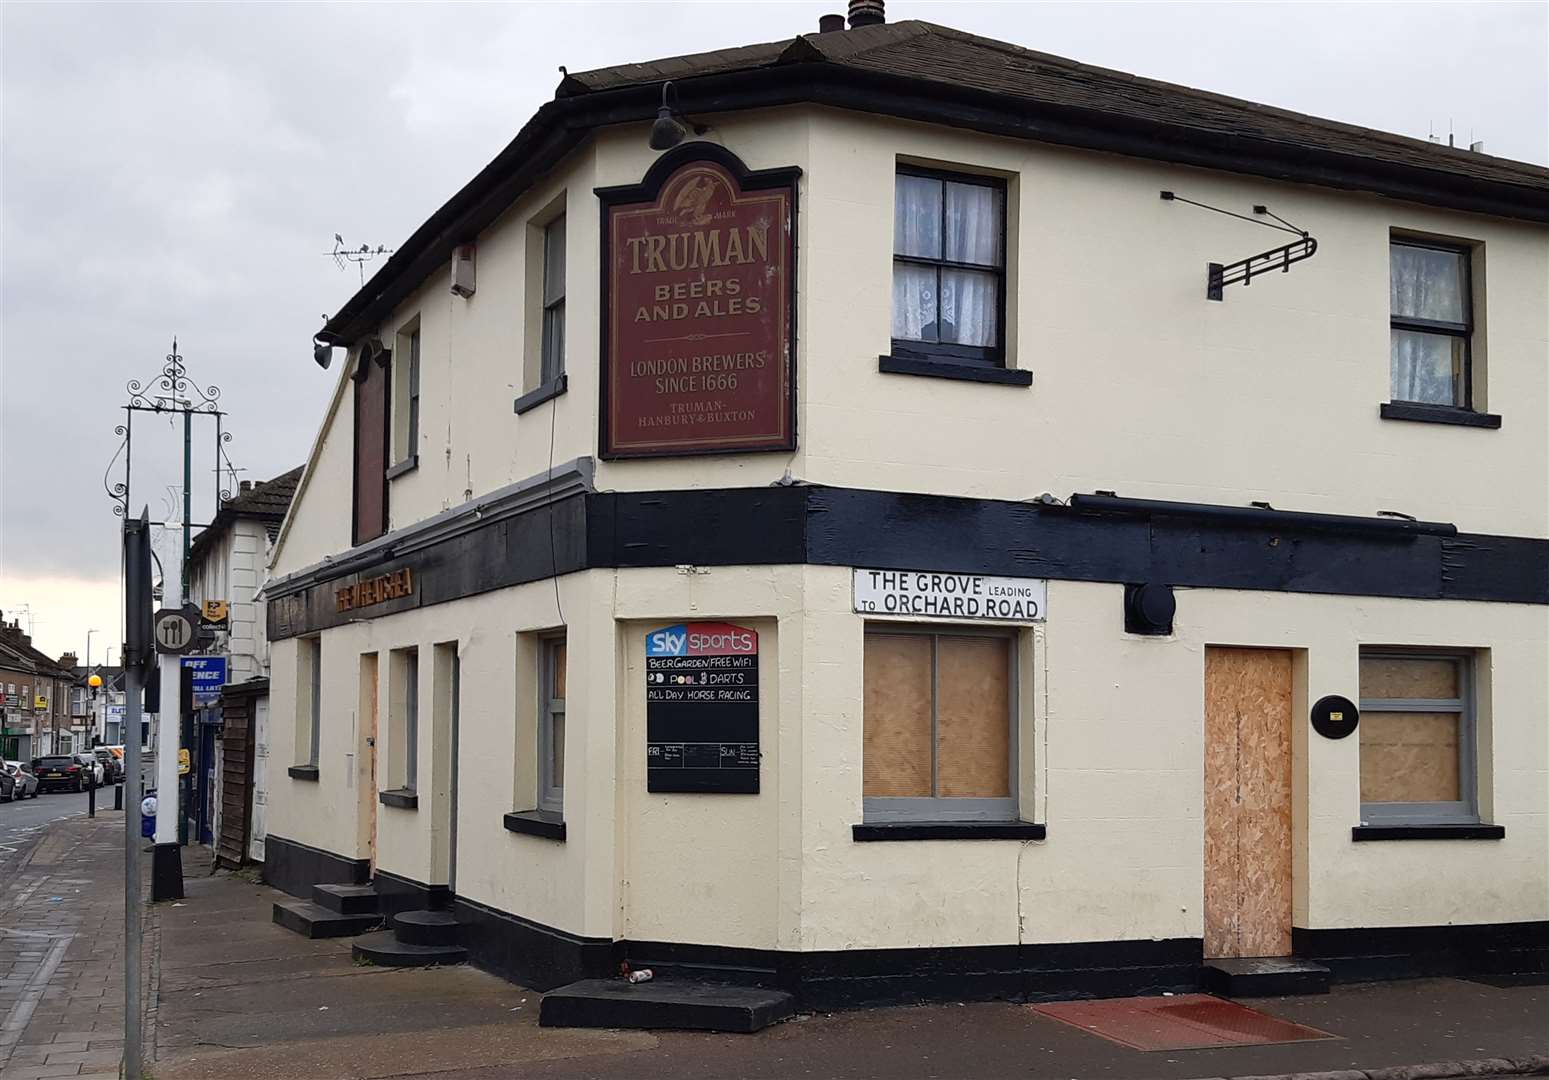 The Wheatsheaf pub in Swanscombe High Street has sat vacant for some time